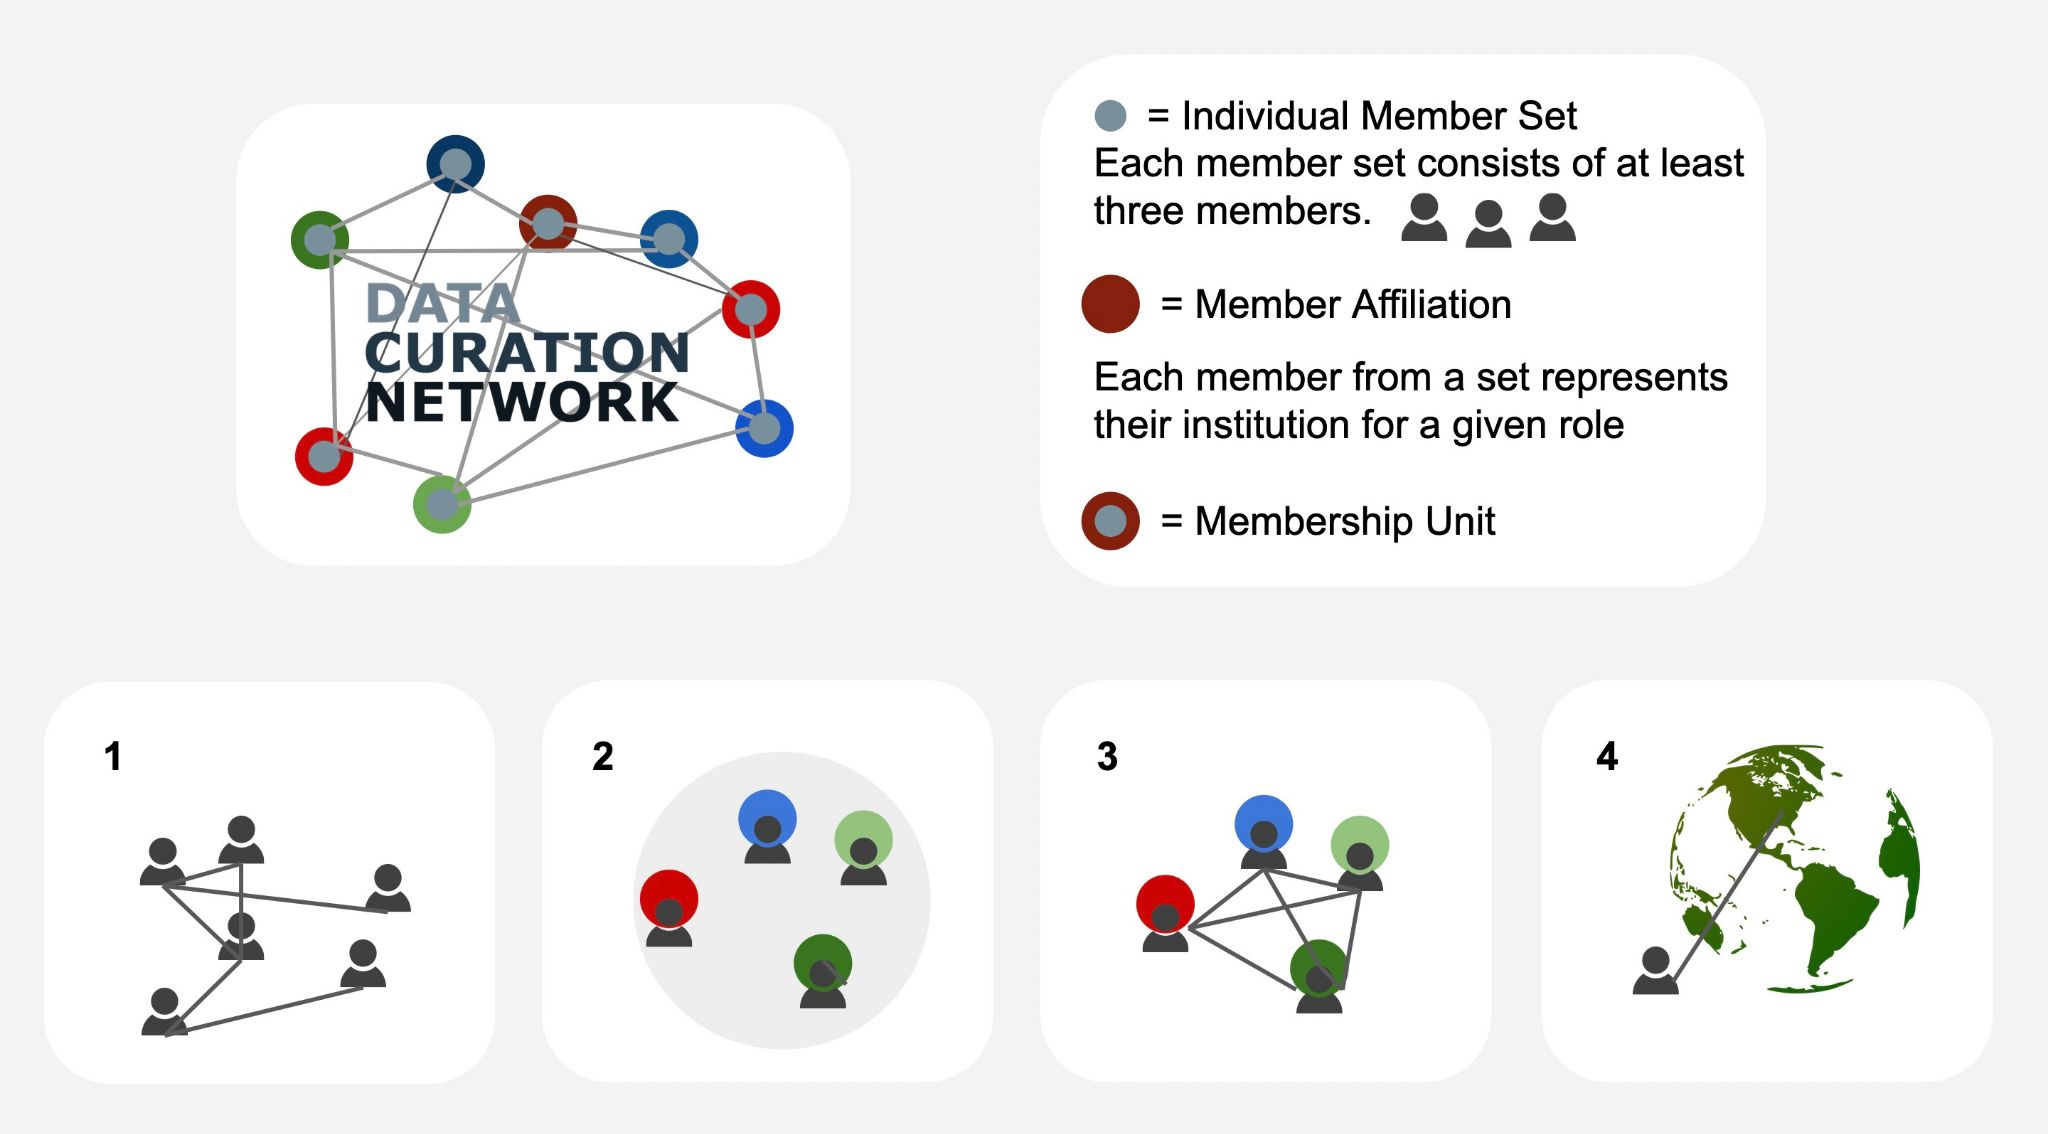 An illustration showing dynamics of interorganizational collaboration as applied within the Data Curation Network. There are four boxes showing how each member and groups interact within the DCN, their research communities, and around the world.